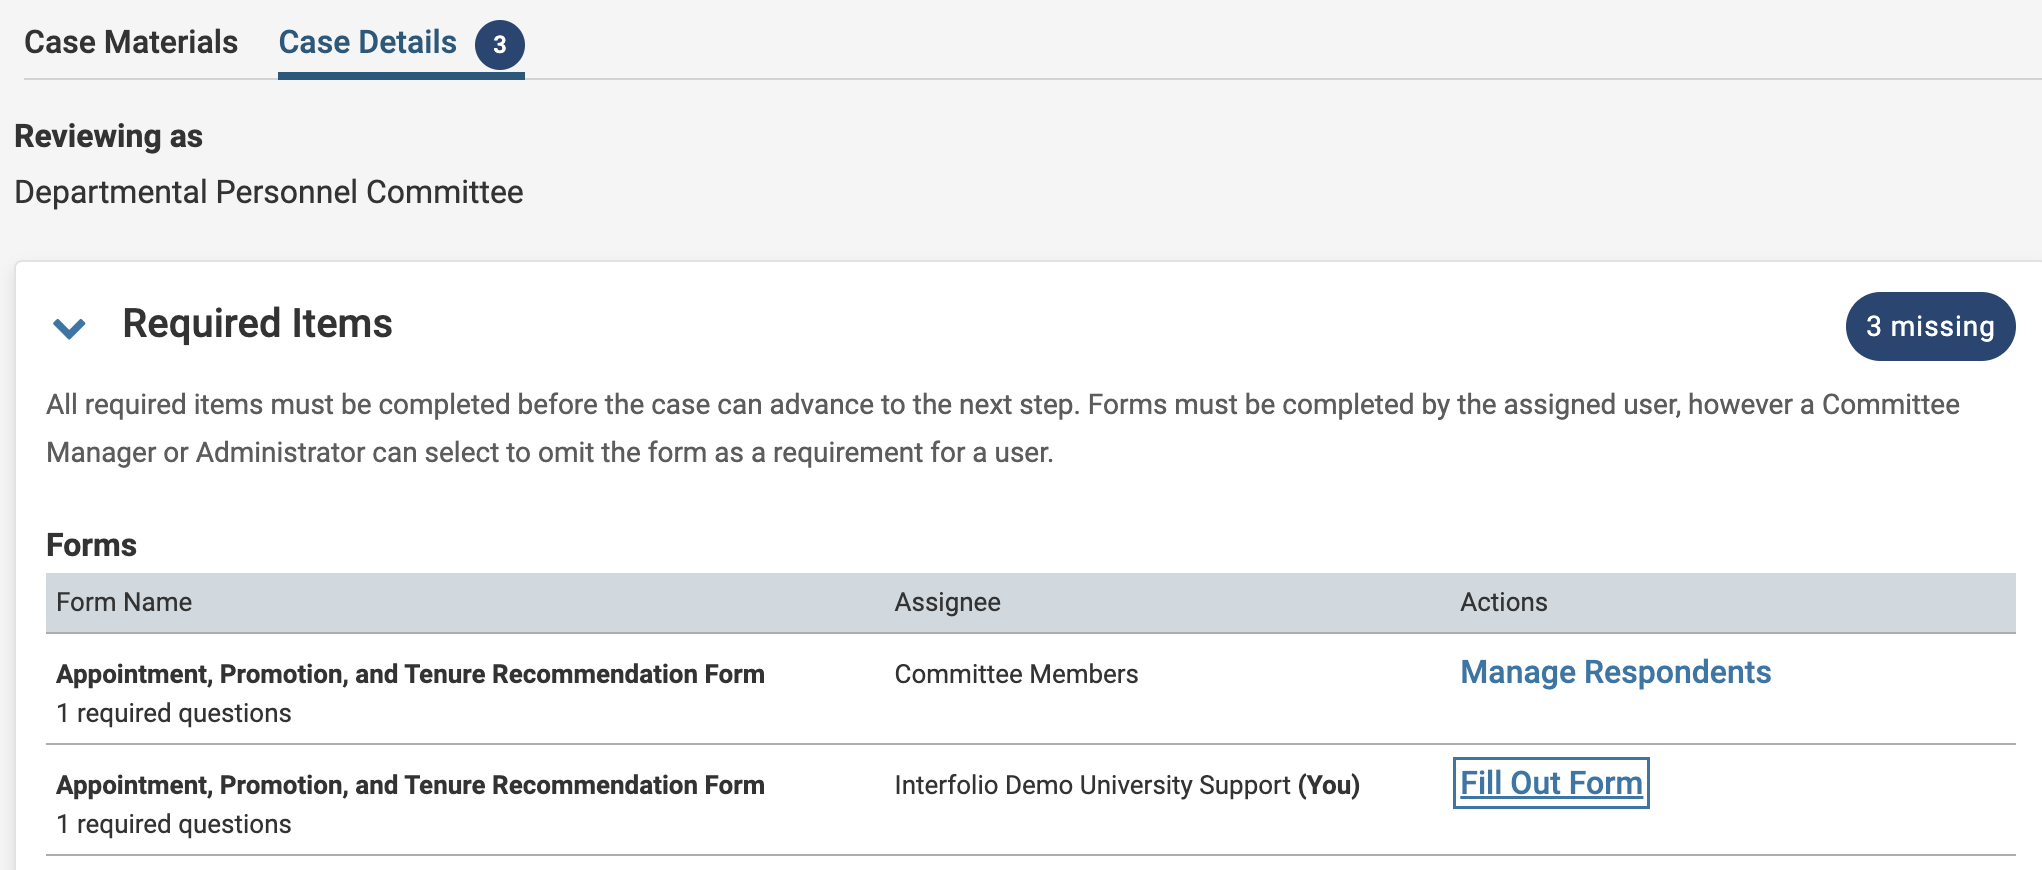 Case Details tab with Fill Out Form selected under Action column